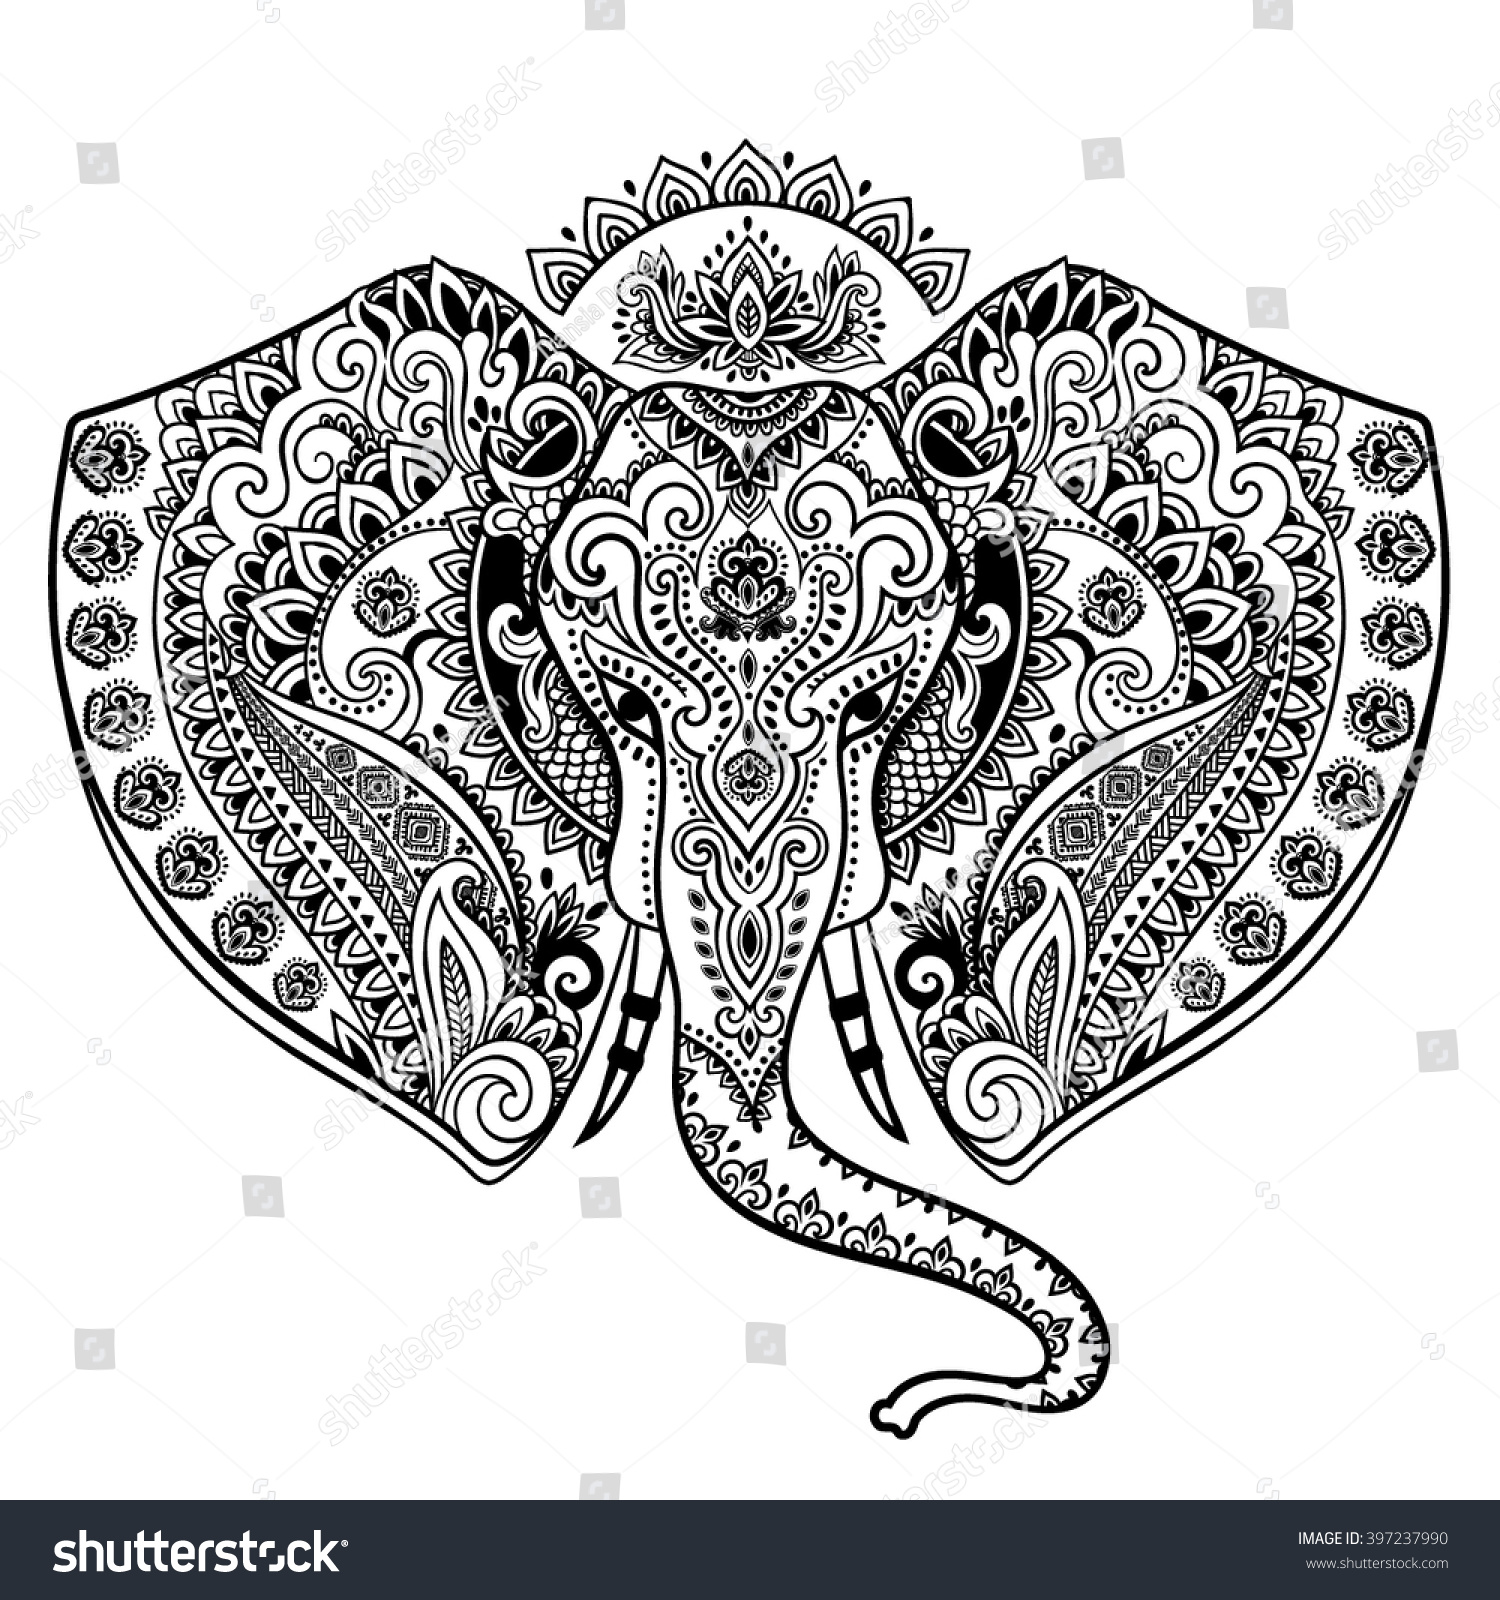 SVG of Vintage graphic vector Indian lotus ethnic elephant. African tribal ornament. Can be used for a coloring book, textile, prints, phone case, greeting card svg